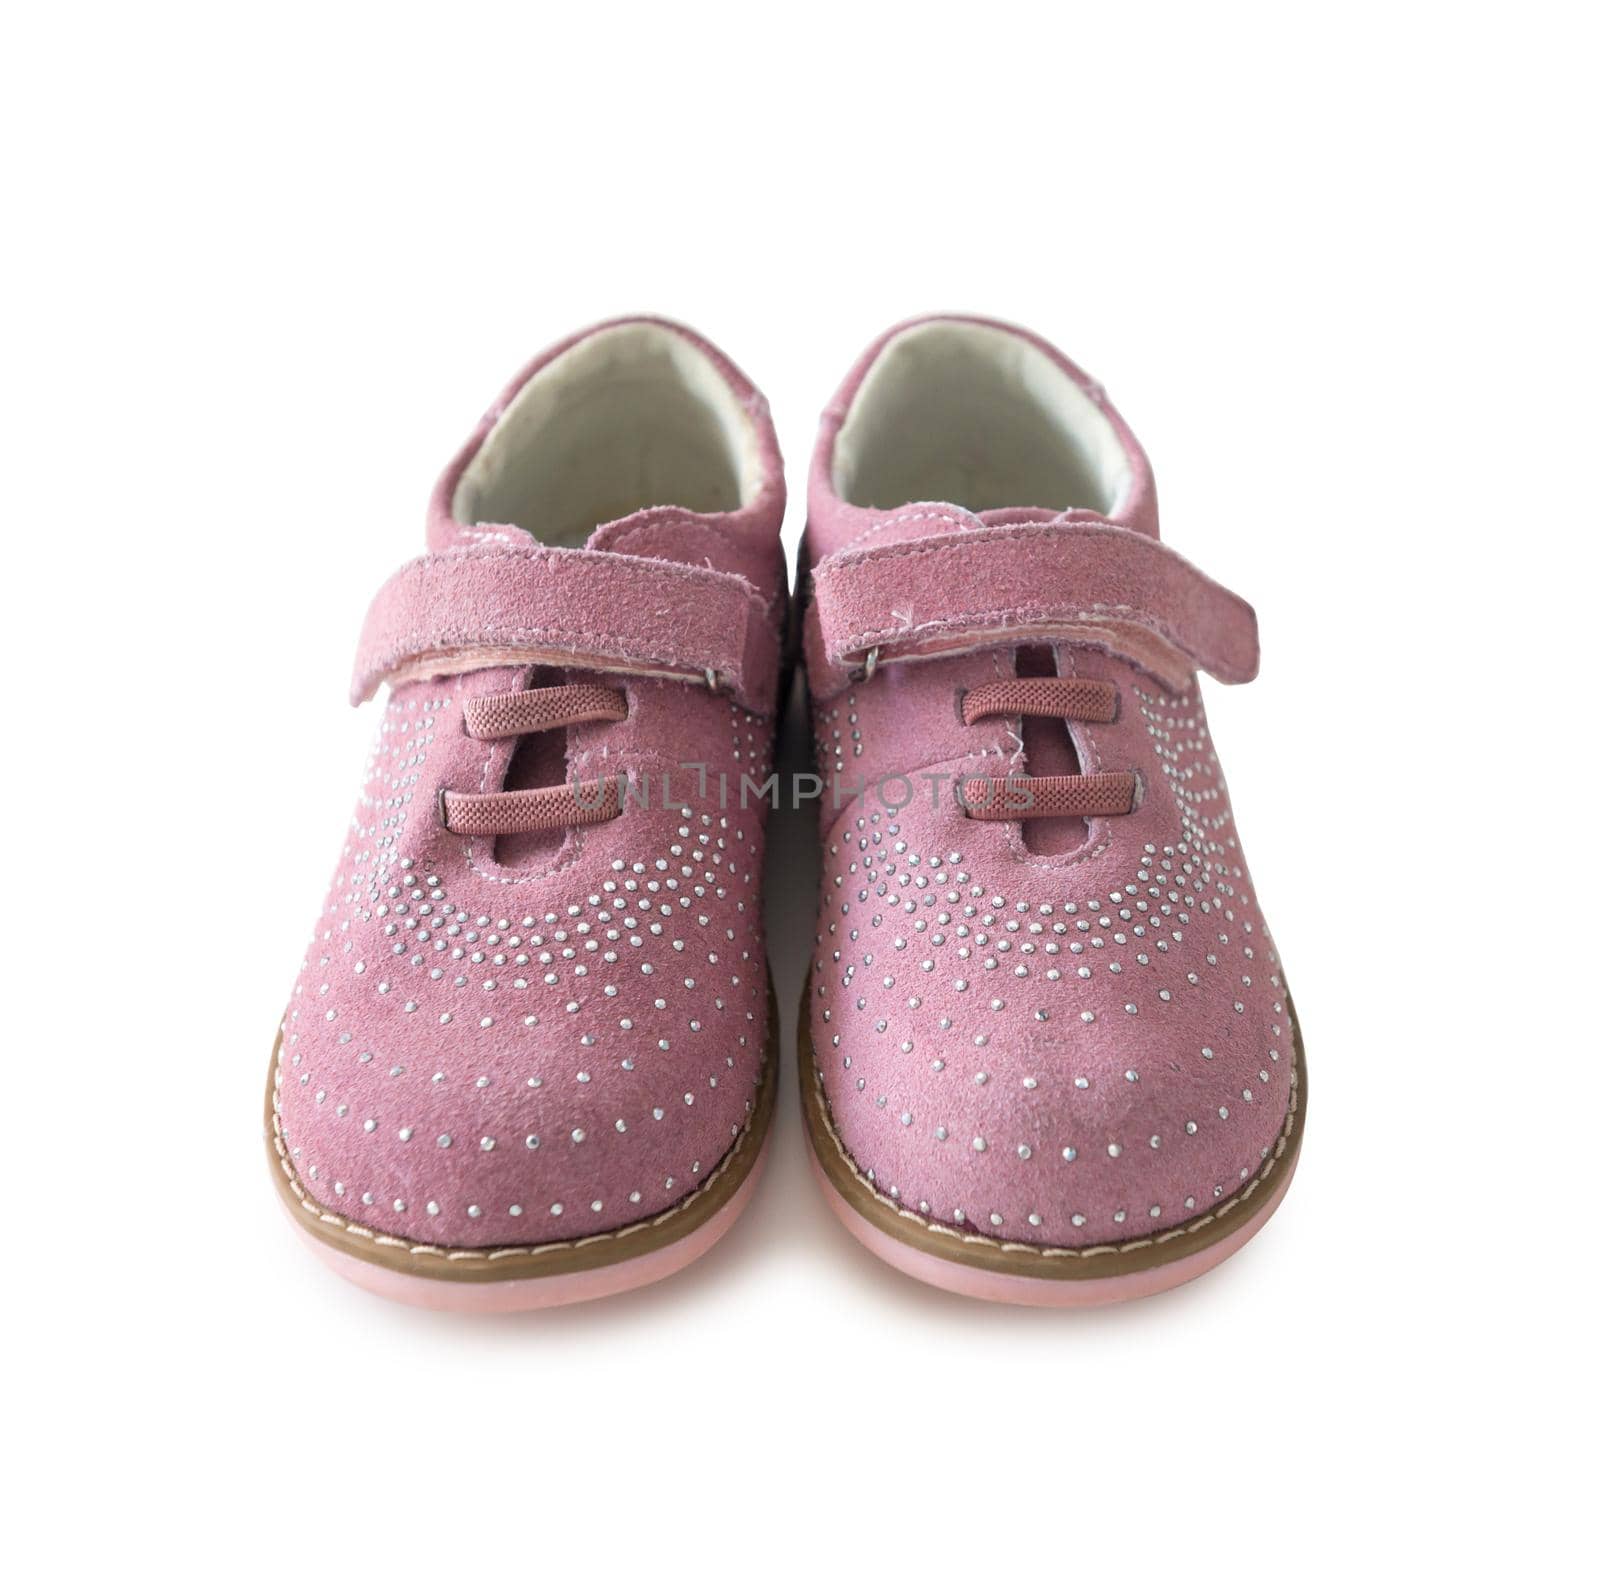 lovely pink childish shoes with laces and clasp isolated on white background